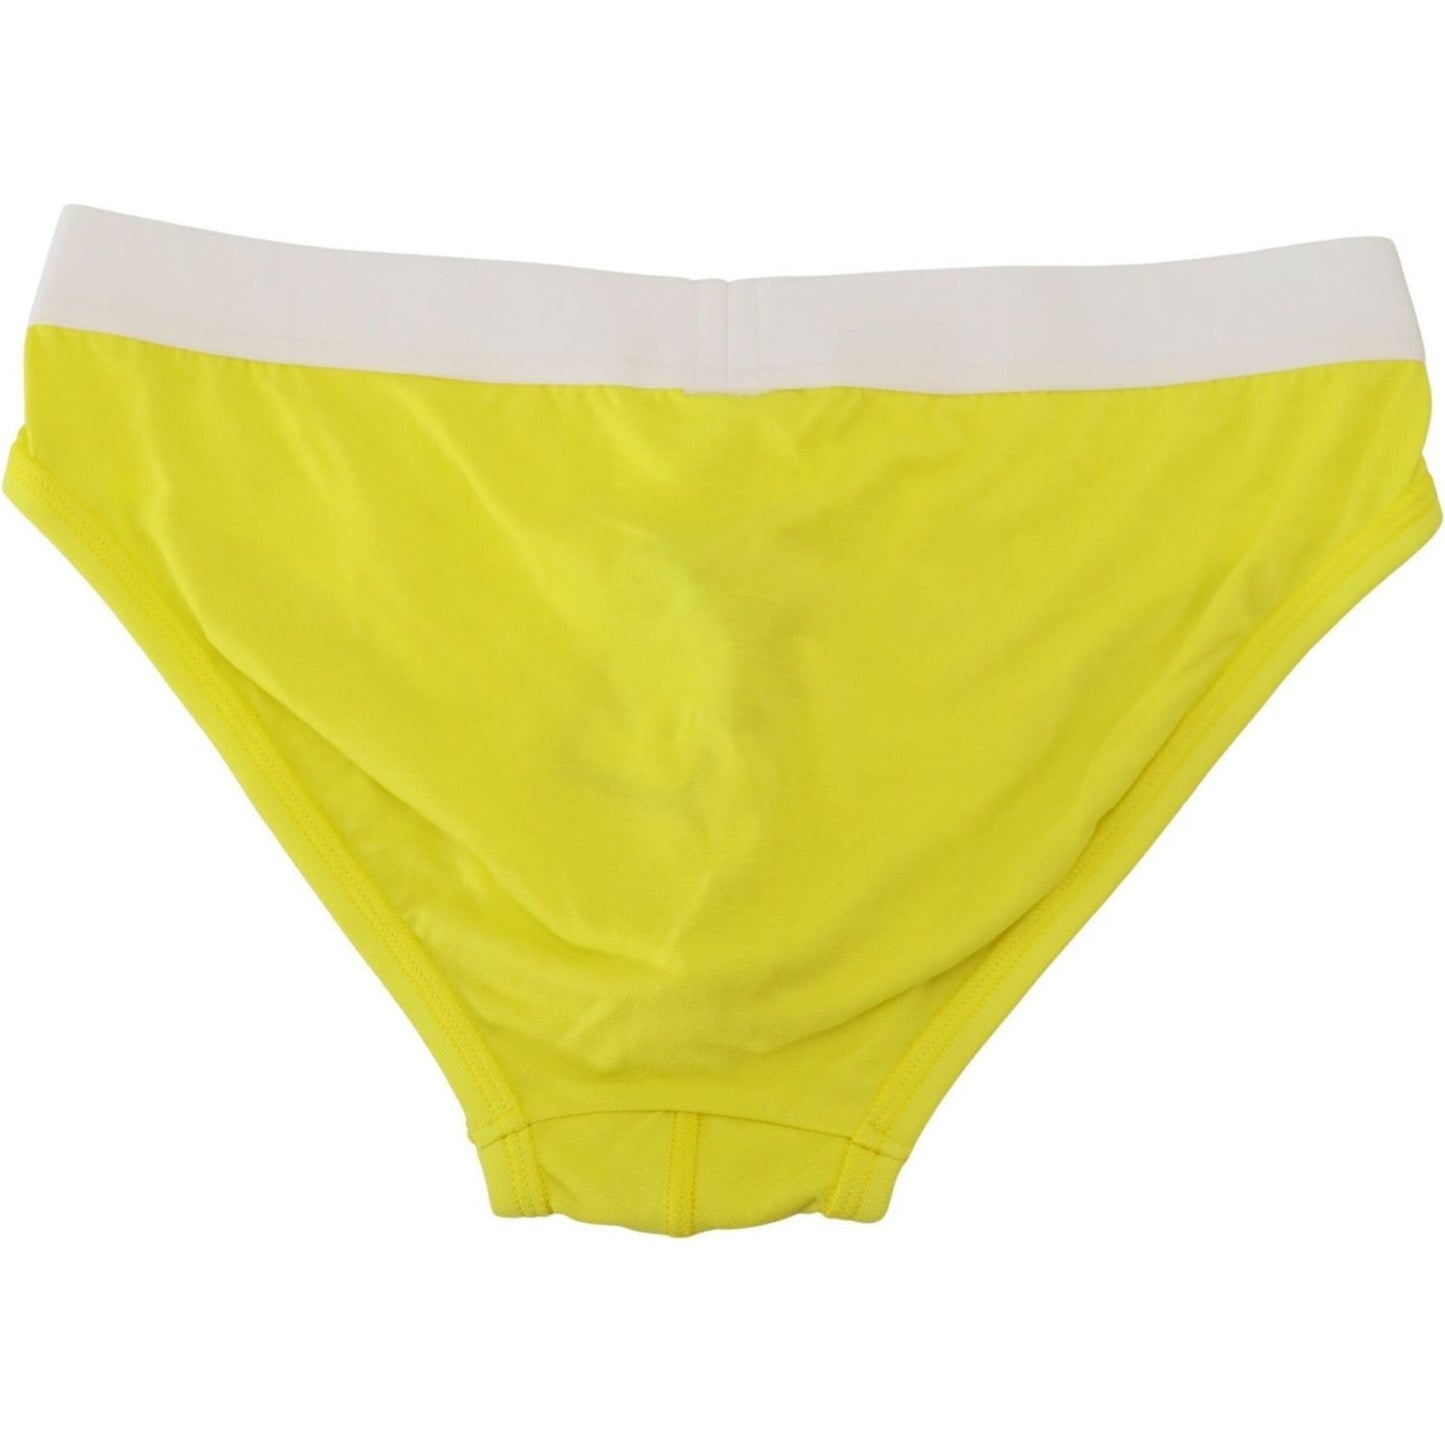 Dsquared² Chic Yellow Modal Stretch Men's Briefs yellow-white-logo-modal-stretch-men-brief-underwear IMG_6180-scaled-ea9f4c32-088.jpg